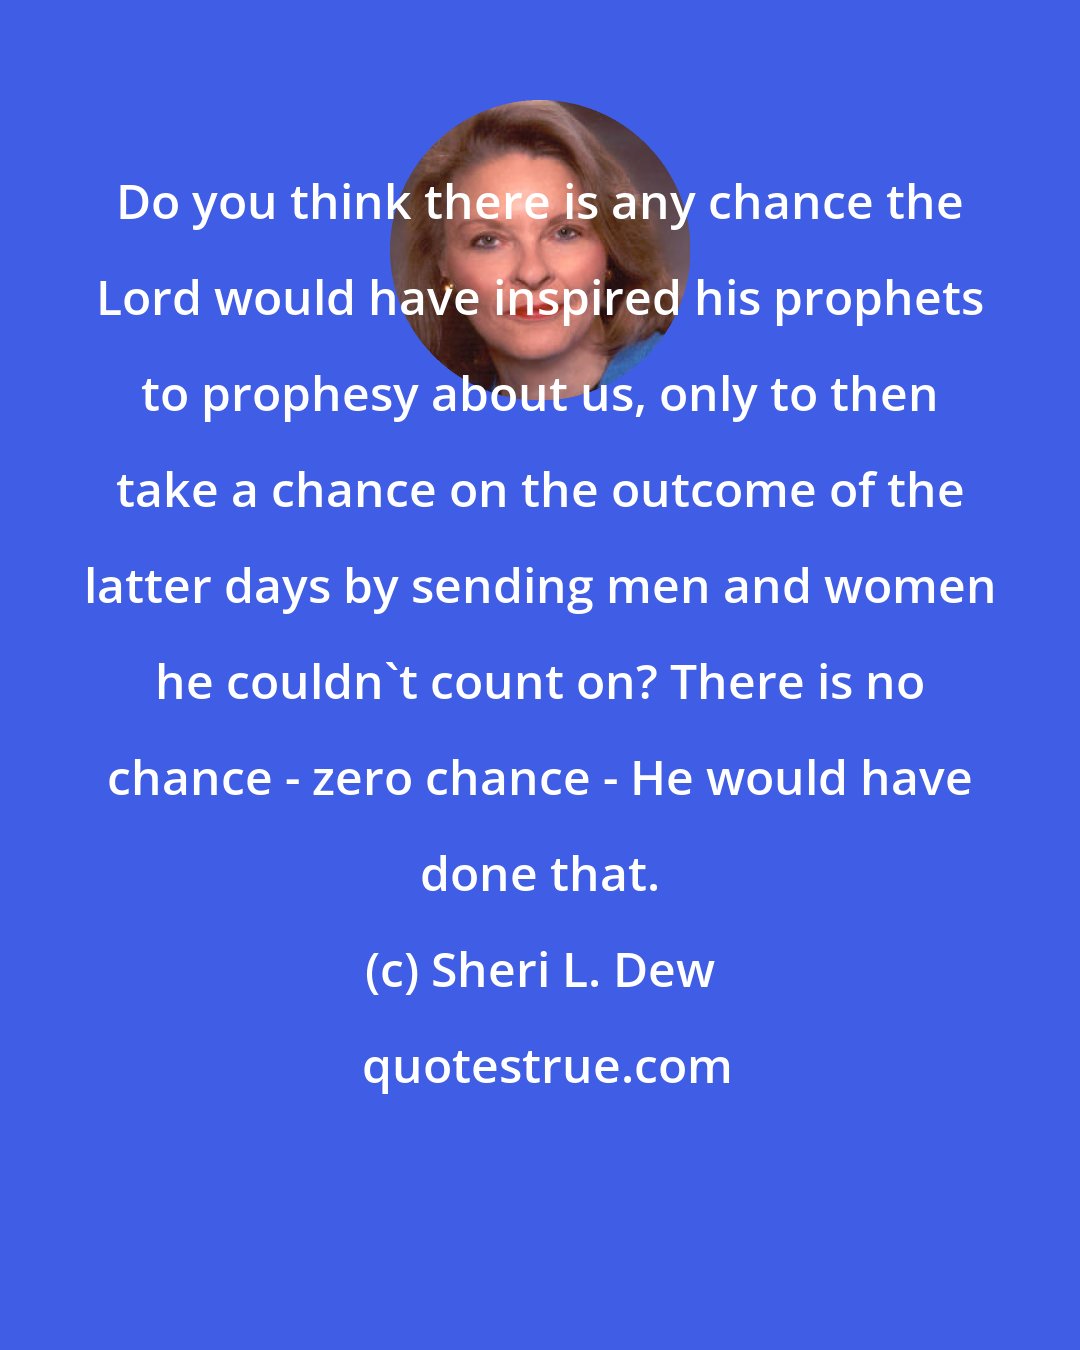 Sheri L. Dew: Do you think there is any chance the Lord would have inspired his prophets to prophesy about us, only to then take a chance on the outcome of the latter days by sending men and women he couldn't count on? There is no chance - zero chance - He would have done that.